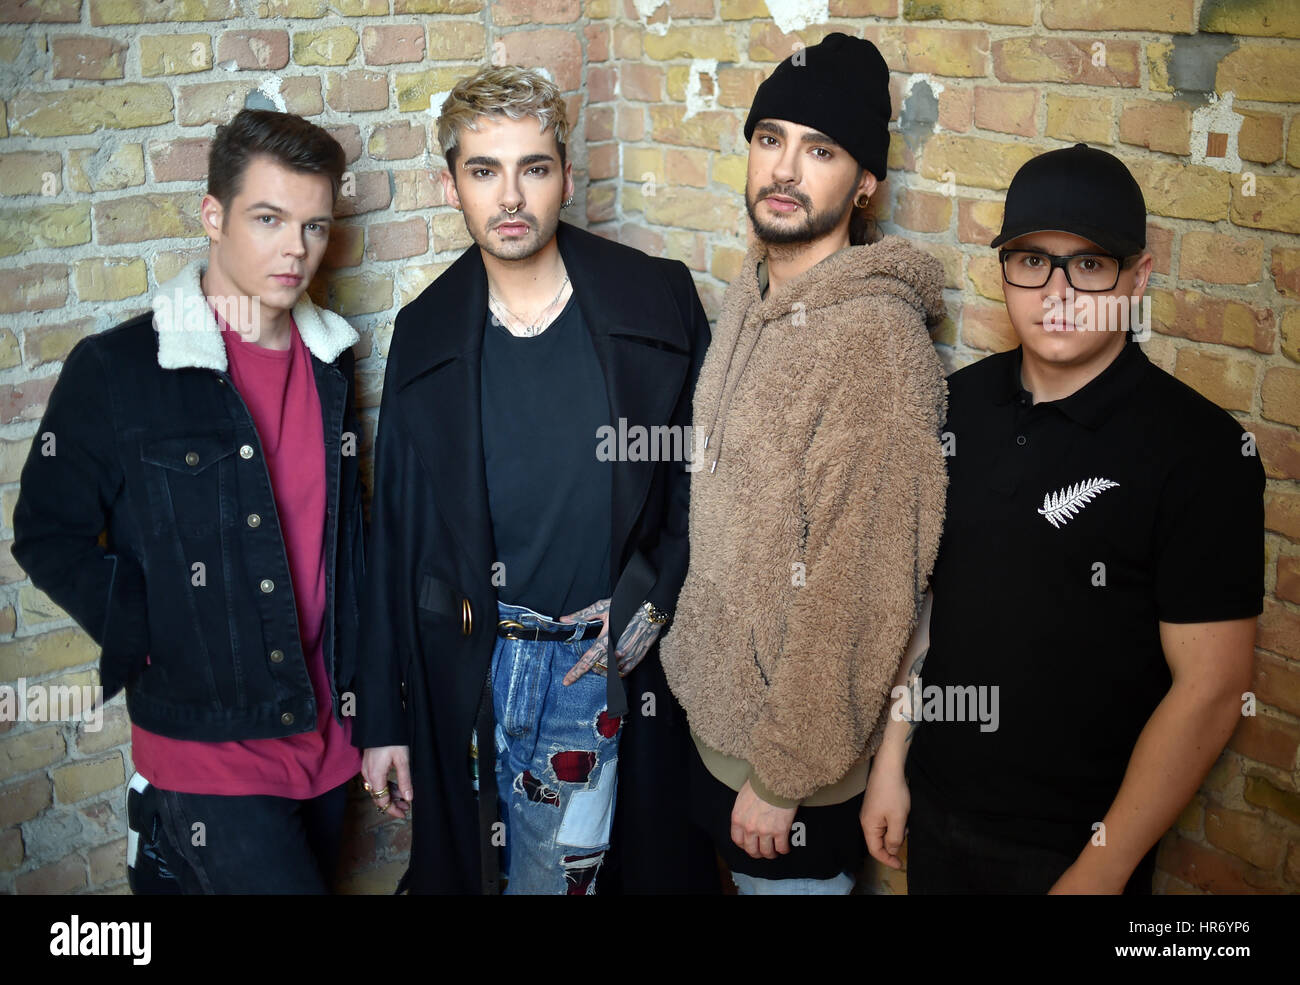 Berlin, Germany. 21st Feb, 2017. Musicians from the band Tokio Hotel: Georg Moritz Hagen Listing (l-r), Bill Kaulitz, Tom Kaulitz and Gustav Klaus Wolfgang Schaefer, standing together in Berlin, Germany, 21 February 2017. On 03 March 2017 they are releasing a new album 'Dream Machine' Photo: Britta Pedersen/dpa-Zentralbild/ZB/dpa/Alamy Live News Stock Photo